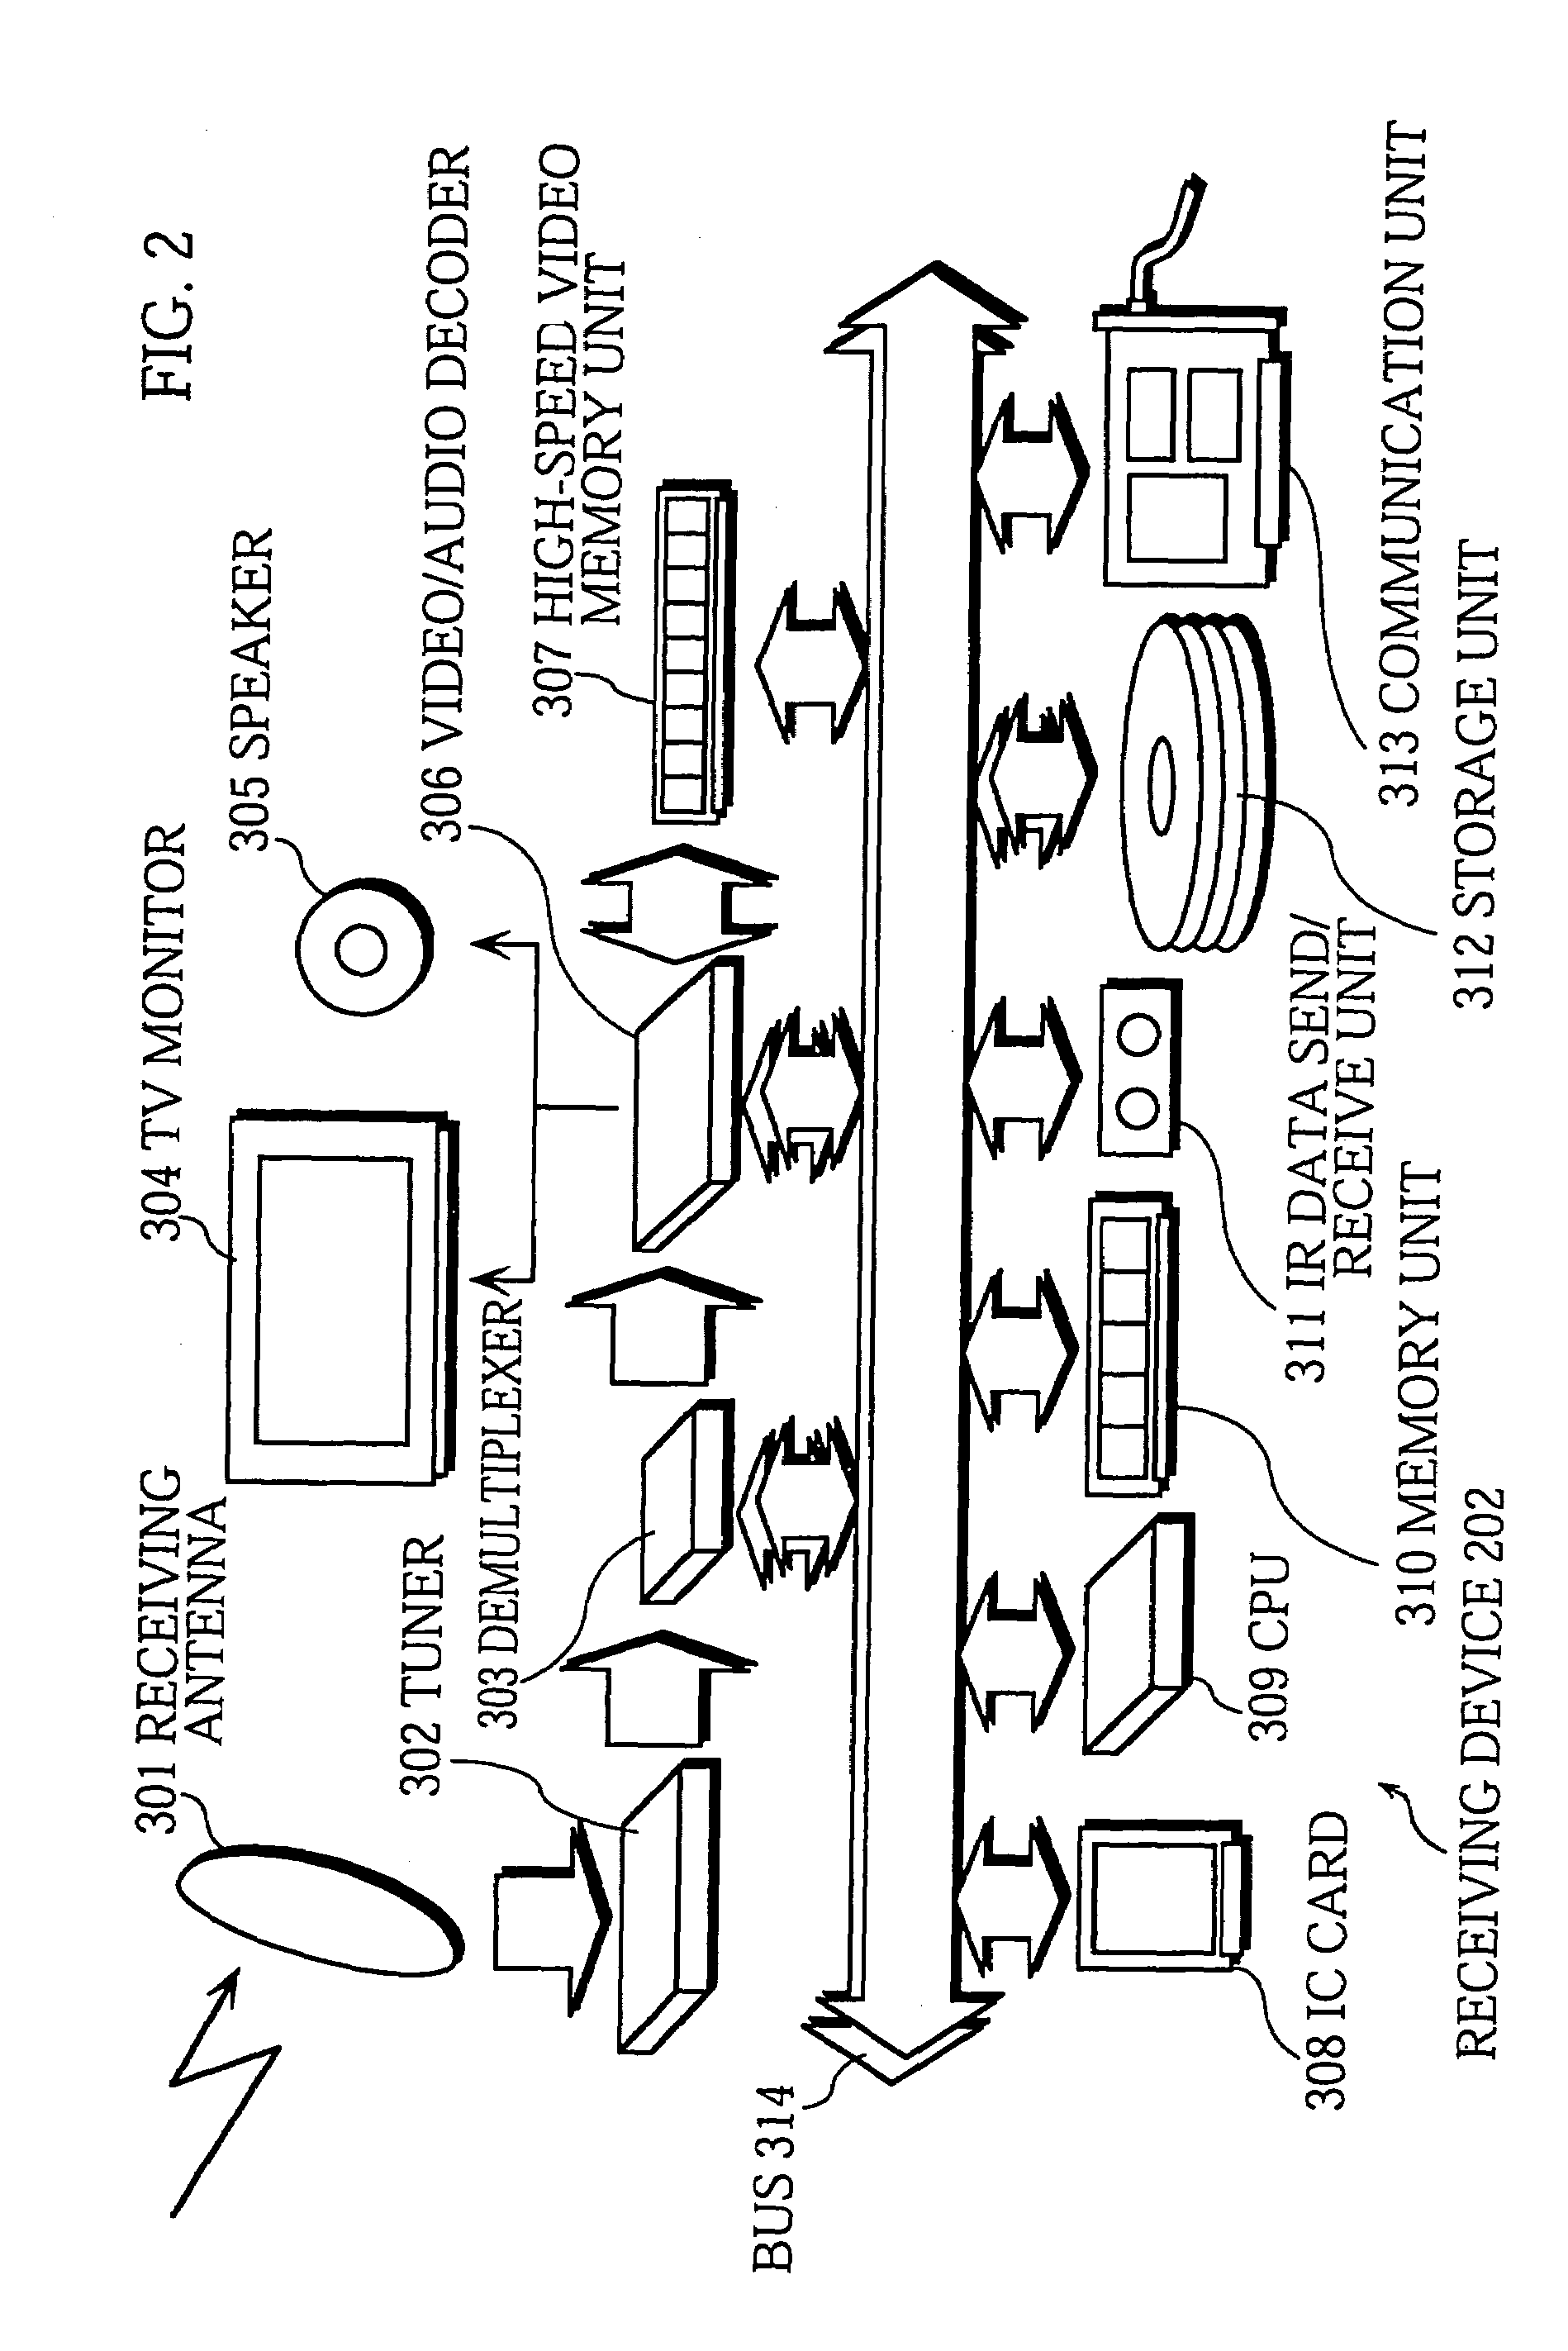 Digital broadcast system and its component devices that provide services in accordance with a broadcast watched by viewers